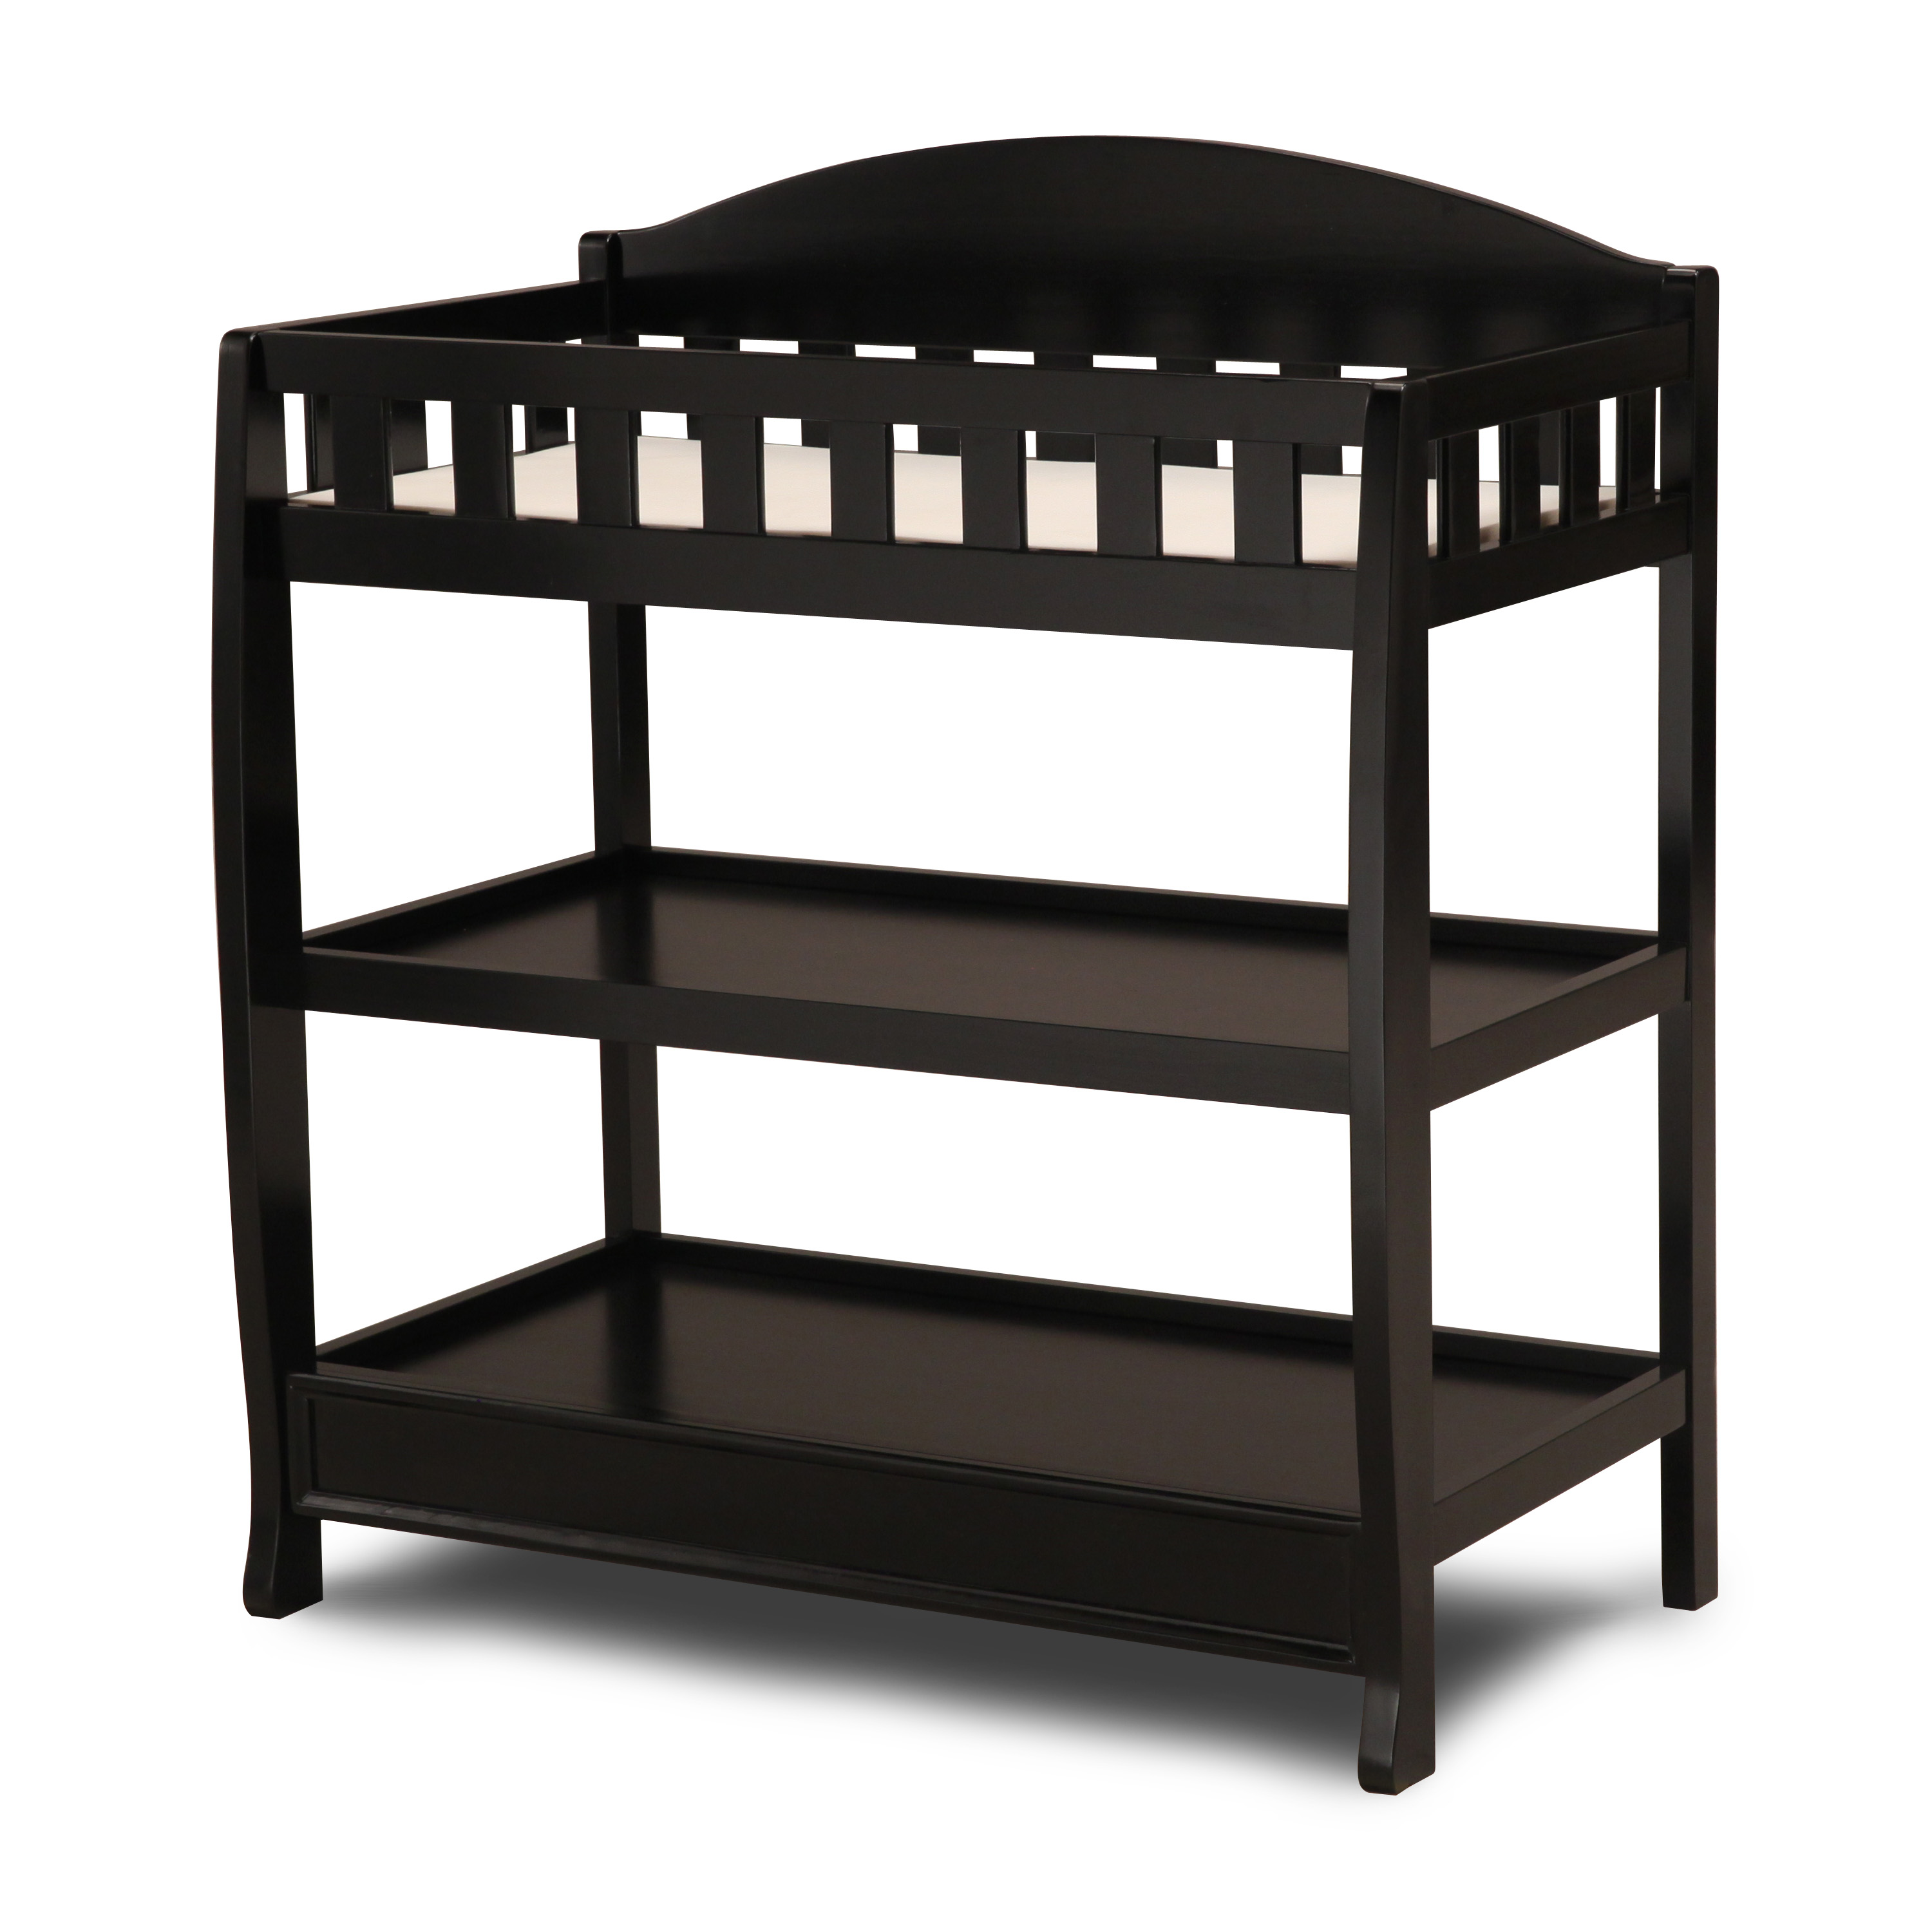 Delta Children Wilmington Changing Table with Pad, Black - image 4 of 6